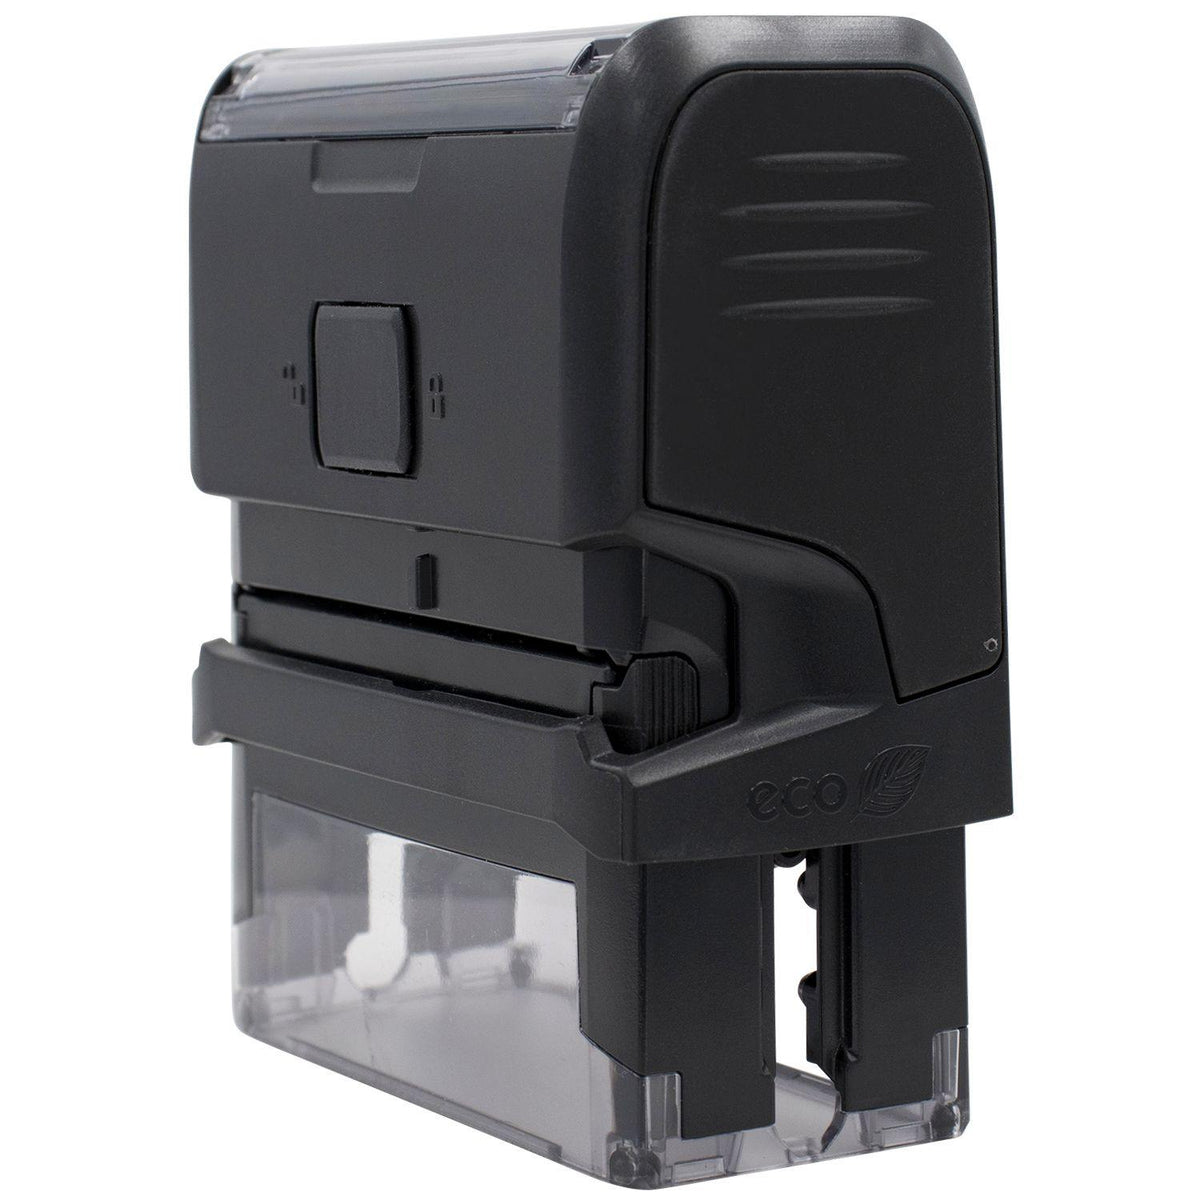 Self Inking Good Job Stamp - Engineer Seal Stamps - Brand_Trodat, Impression Size_Small, Stamp Type_Self-Inking Stamp, Type of Use_Teacher